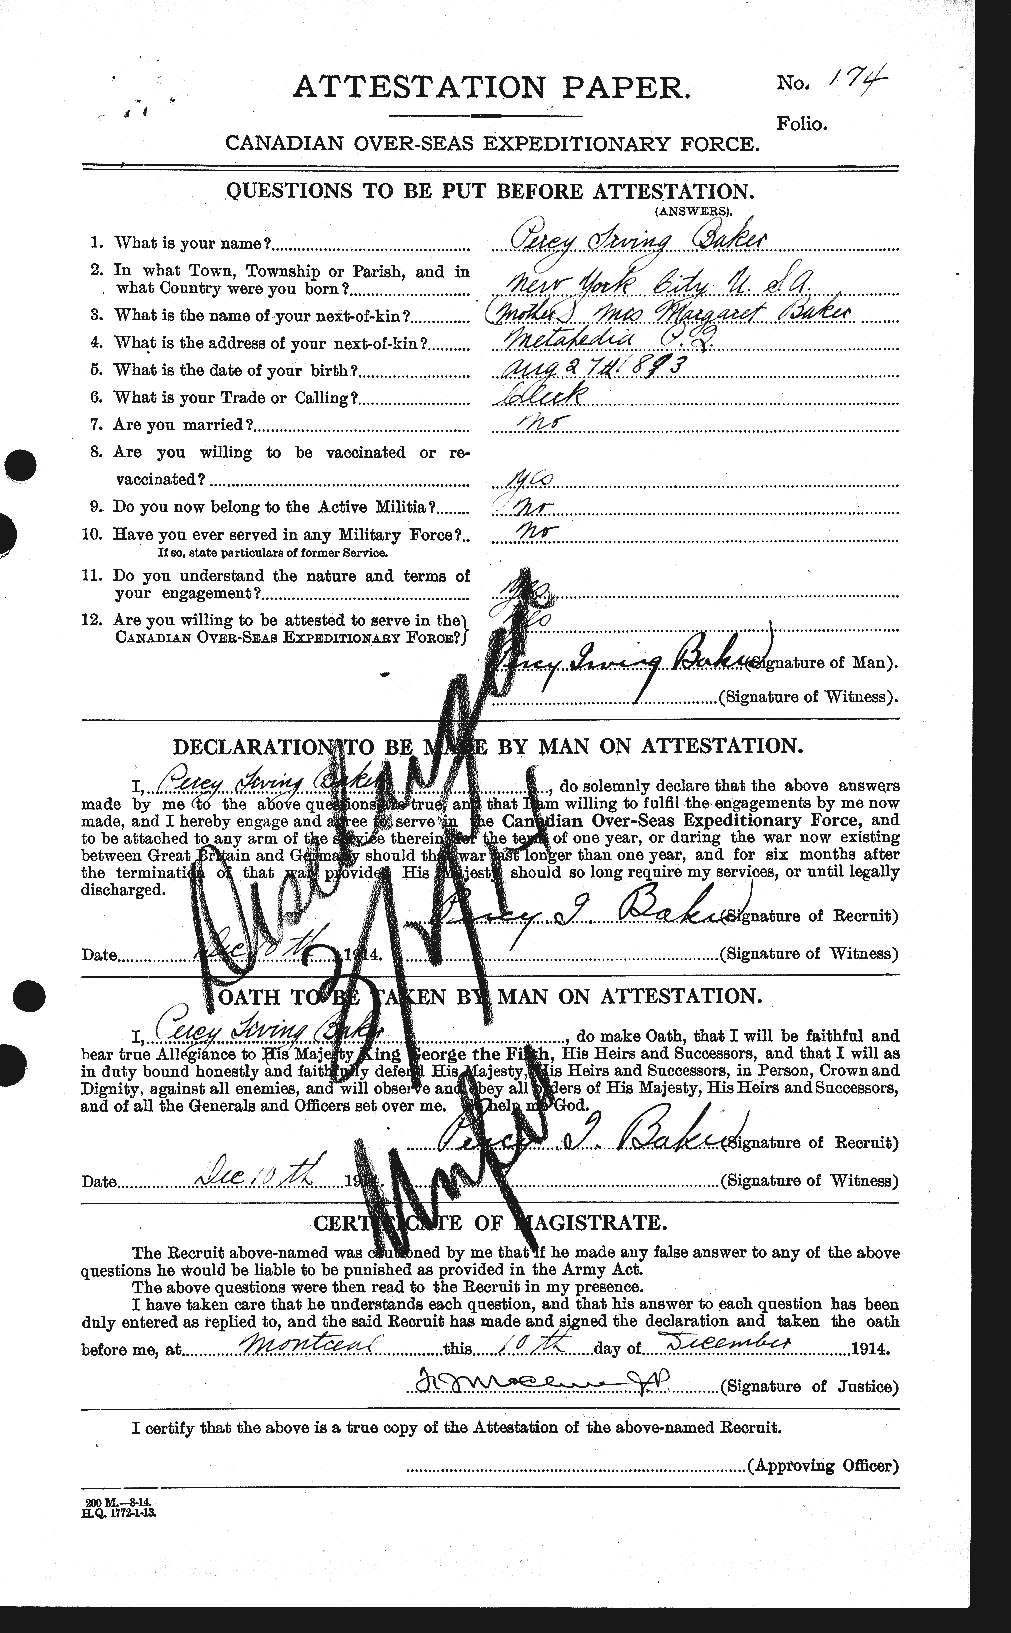 Personnel Records of the First World War - CEF 222261a